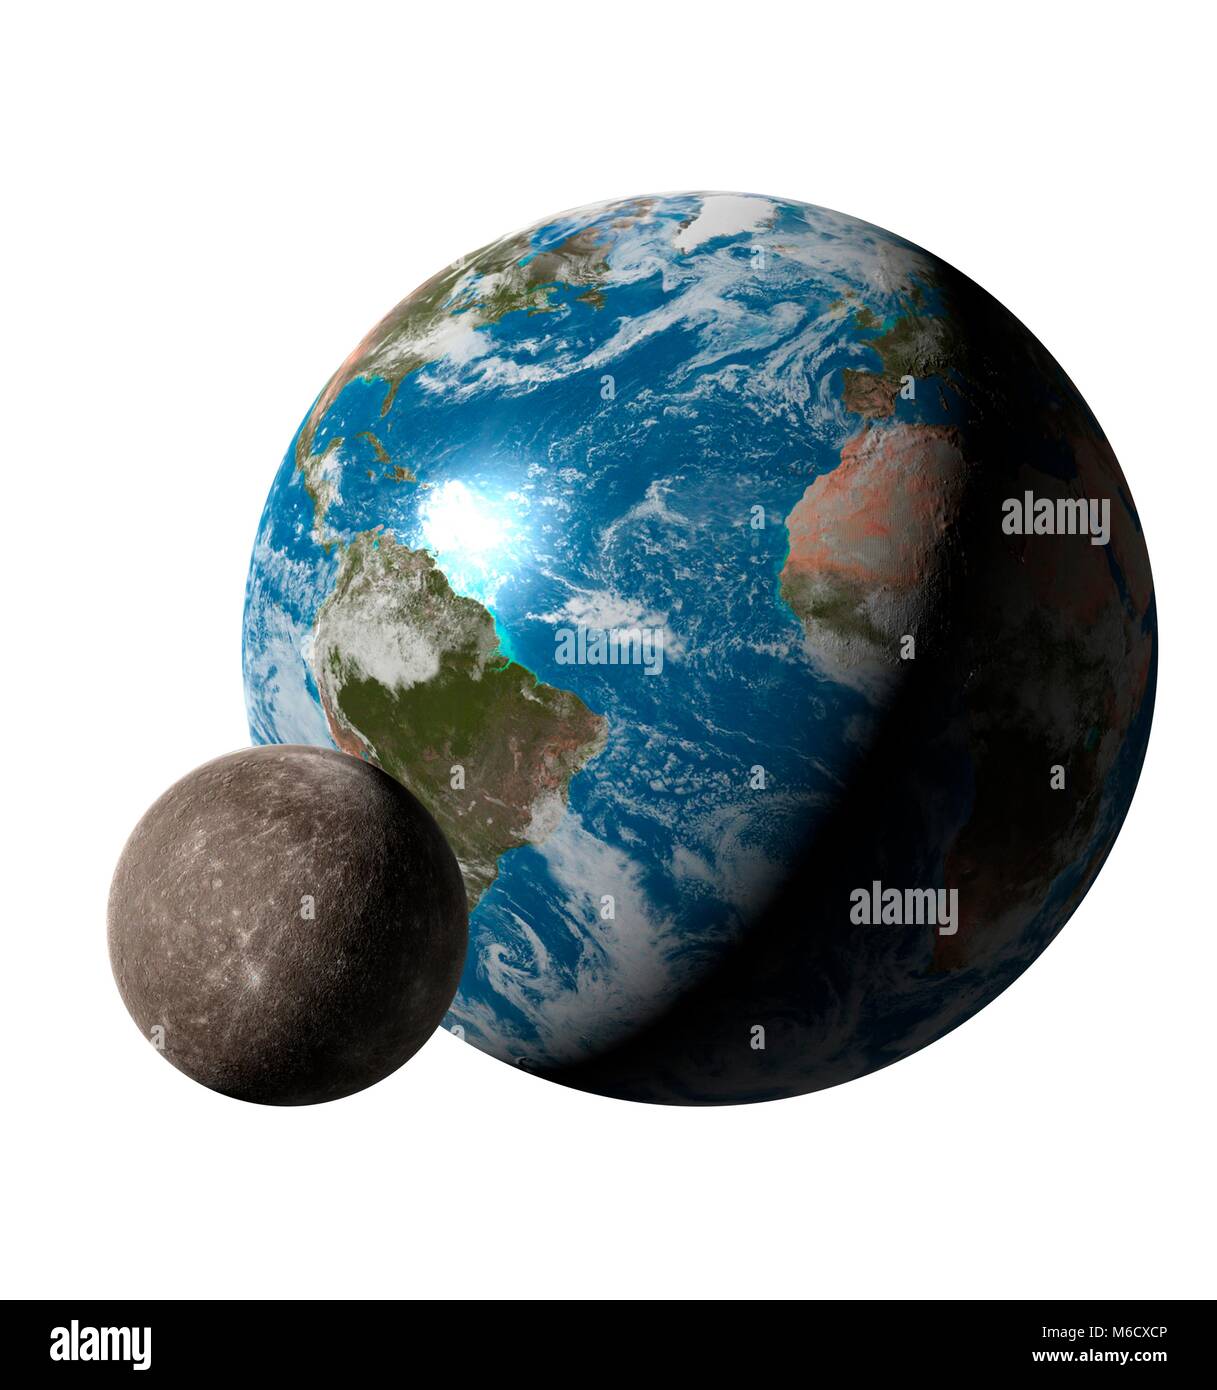 Image comparing the size of Earth (right) with the planet Mercury. It is the closest planet to the Sun, with an average distance from it of 0.39 times the Earth-Sun distance. With a diameter of 38% that of the Earth, Mercury is the Solar System's smallest planet. Stock Photo